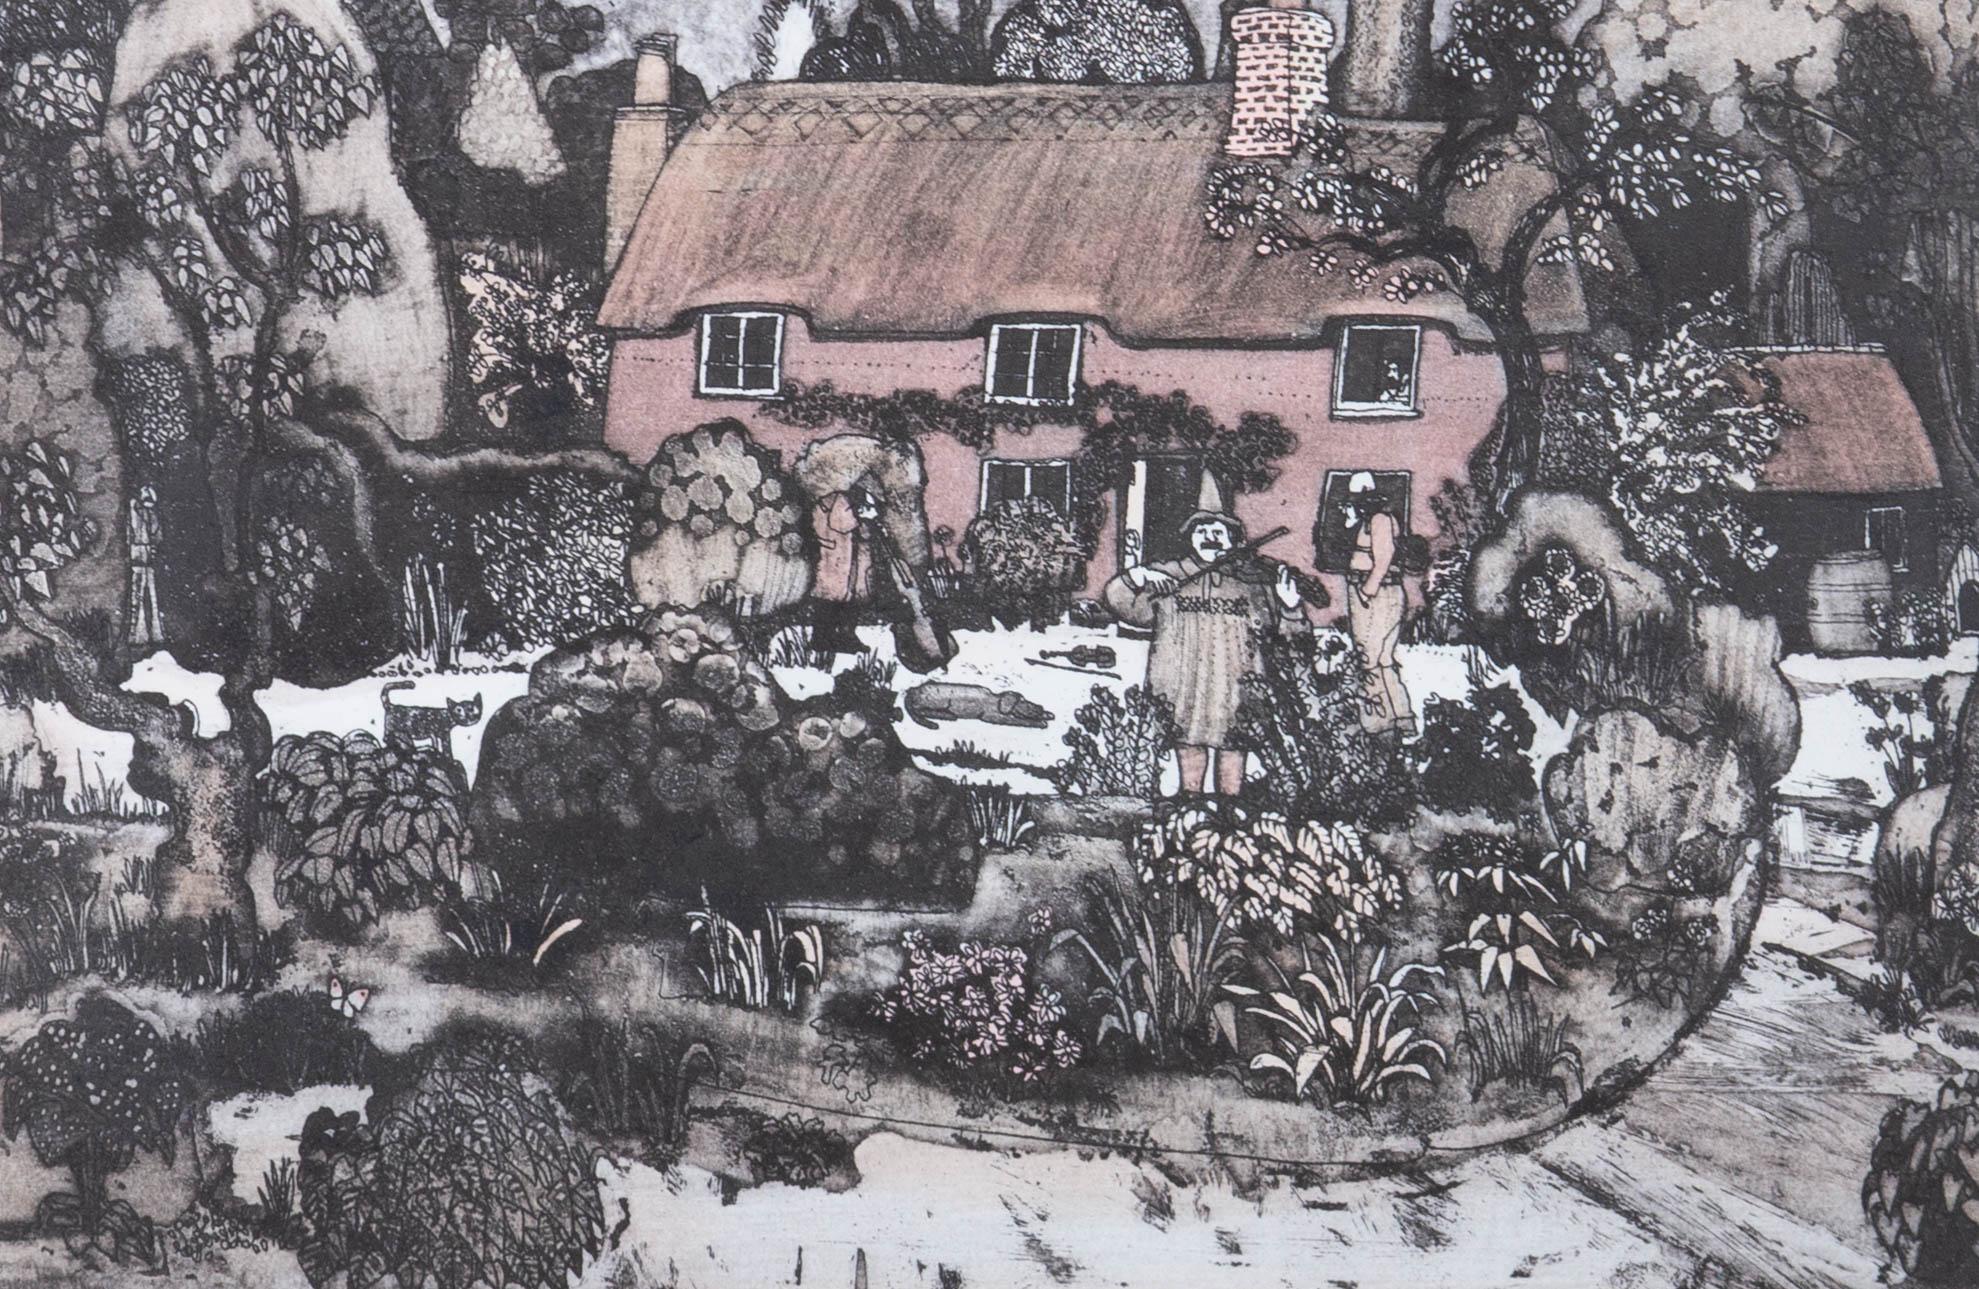 A charming and fun acid etching in Clarke's typical naive style, showni the cottage and garden of the famous English writer, Thomas Hardy, who can be seen playing a violin out in the garden. The etching is signed in graphite to the lower right and